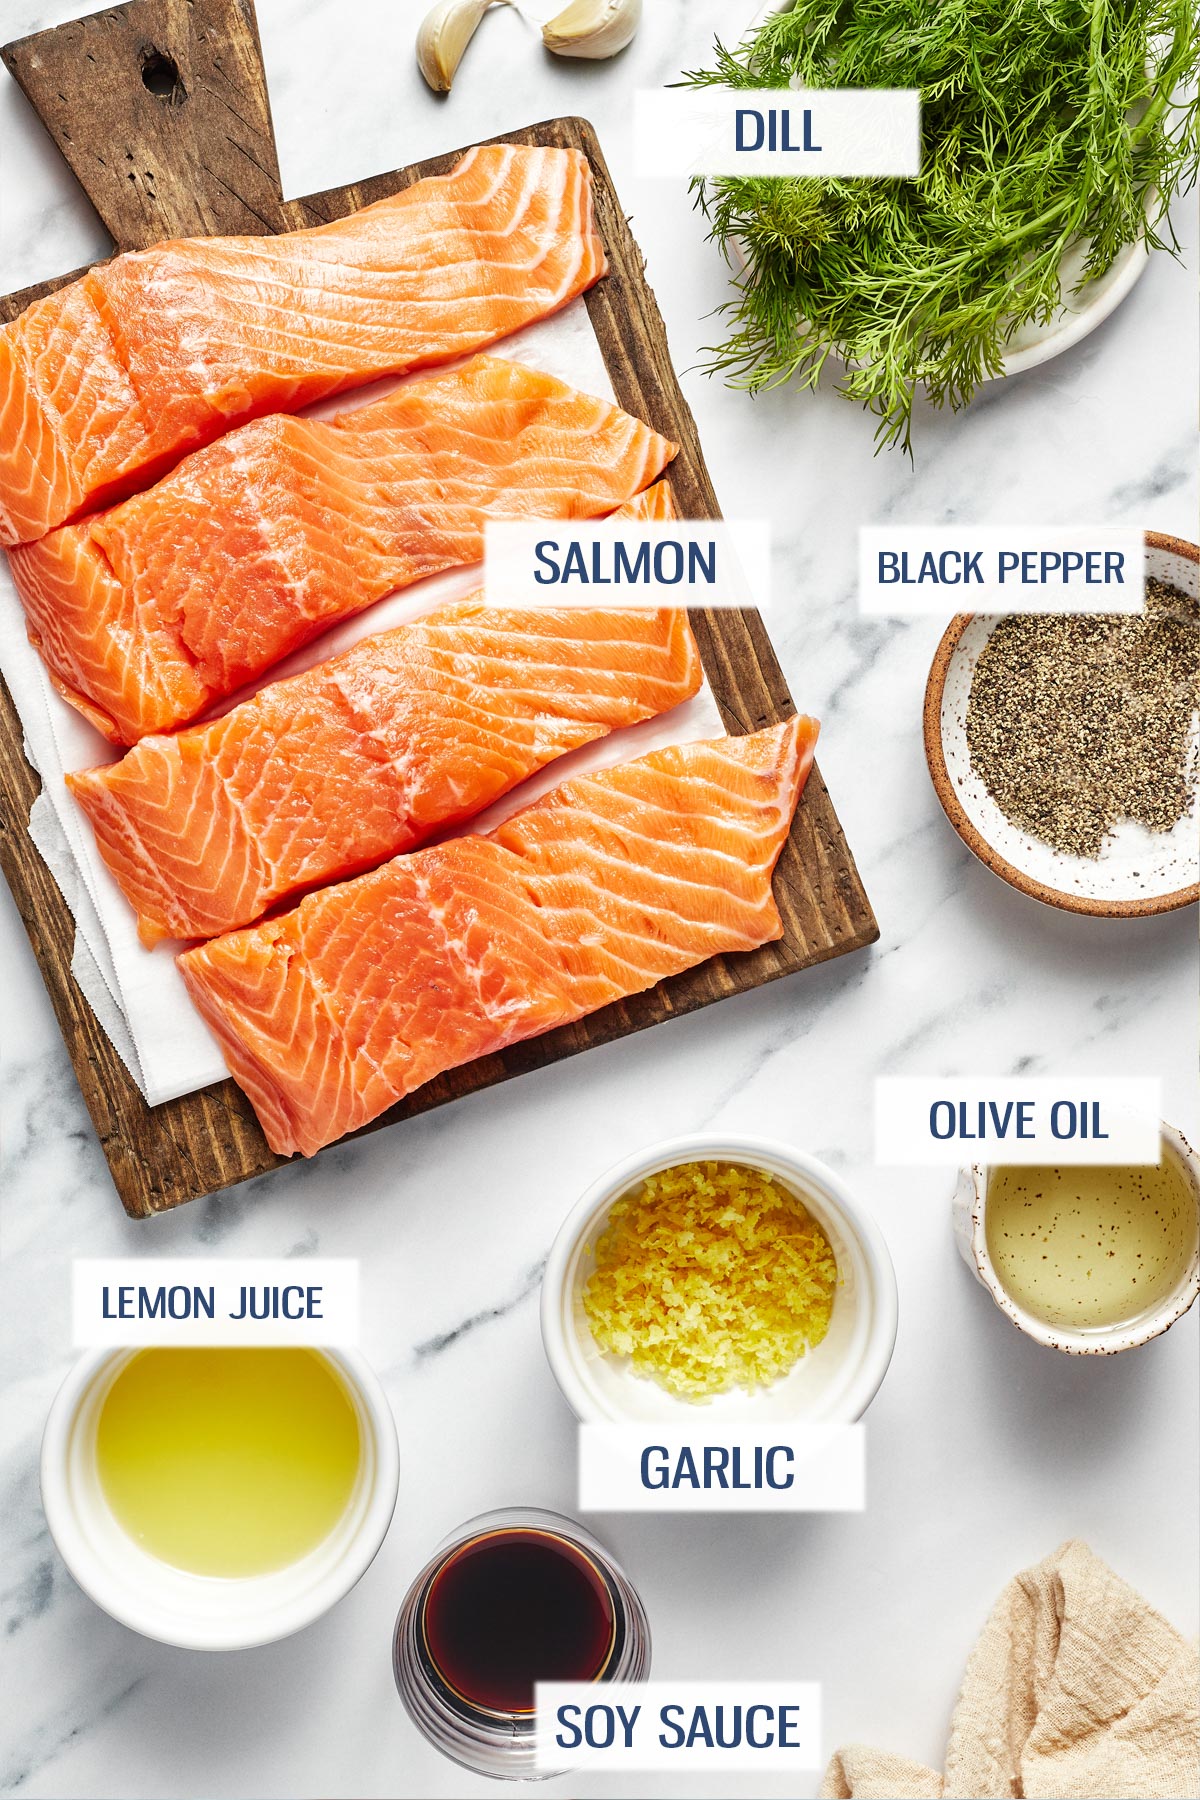 Ingredients for air fryer salmon: salmon, dill, black pepper, lemon juice, garlic, olive oil, and soy sauce.